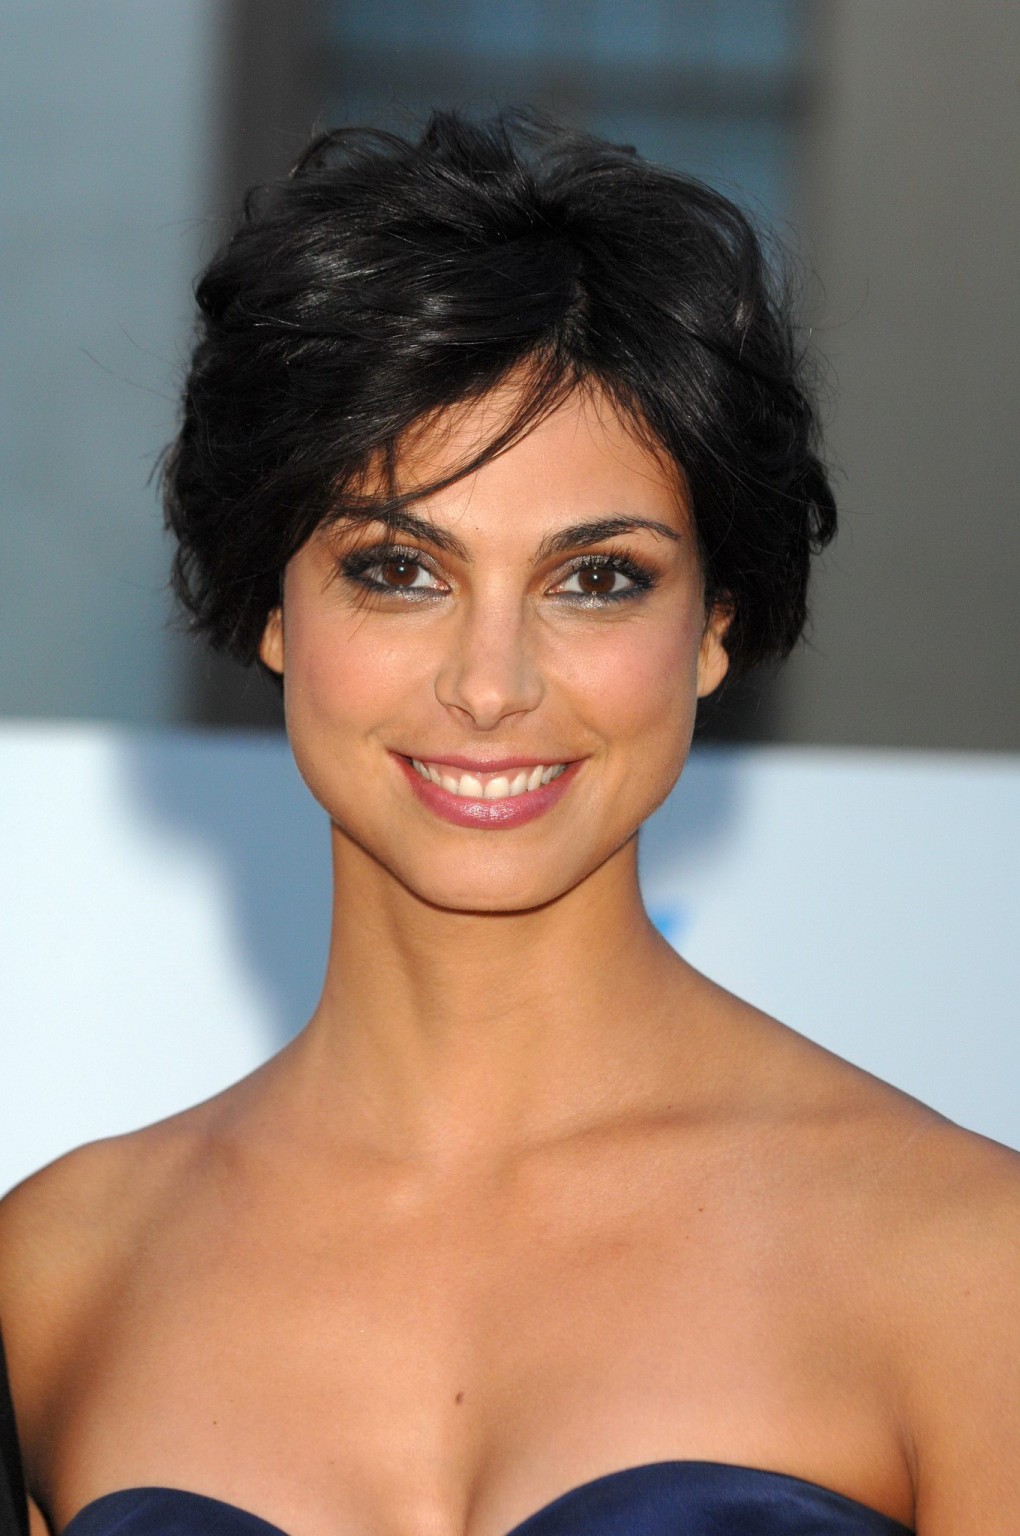 Morena Baccarin shows cleavage wearing a strapless dress at the Israel Film Fest #75270005